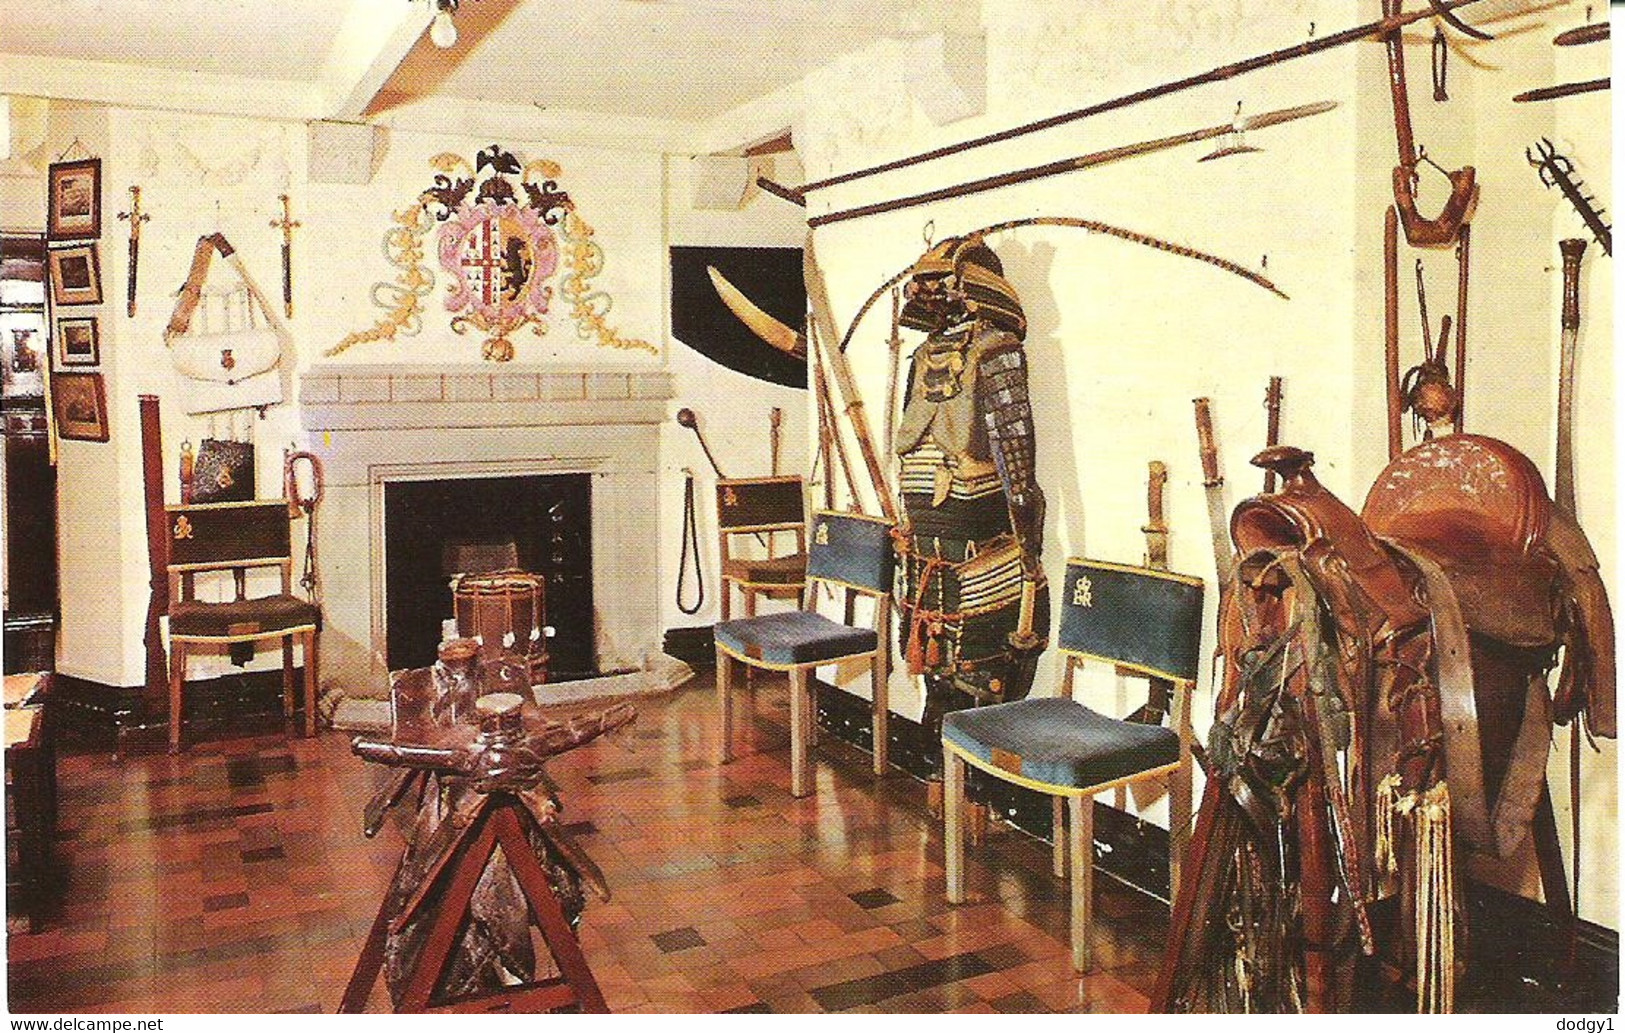 THE ARMOURY, ST. MICHAELS MOUNT, CORNWALL, ENGLAND. UNUSED POSTCARD Kw9 - St Michael's Mount